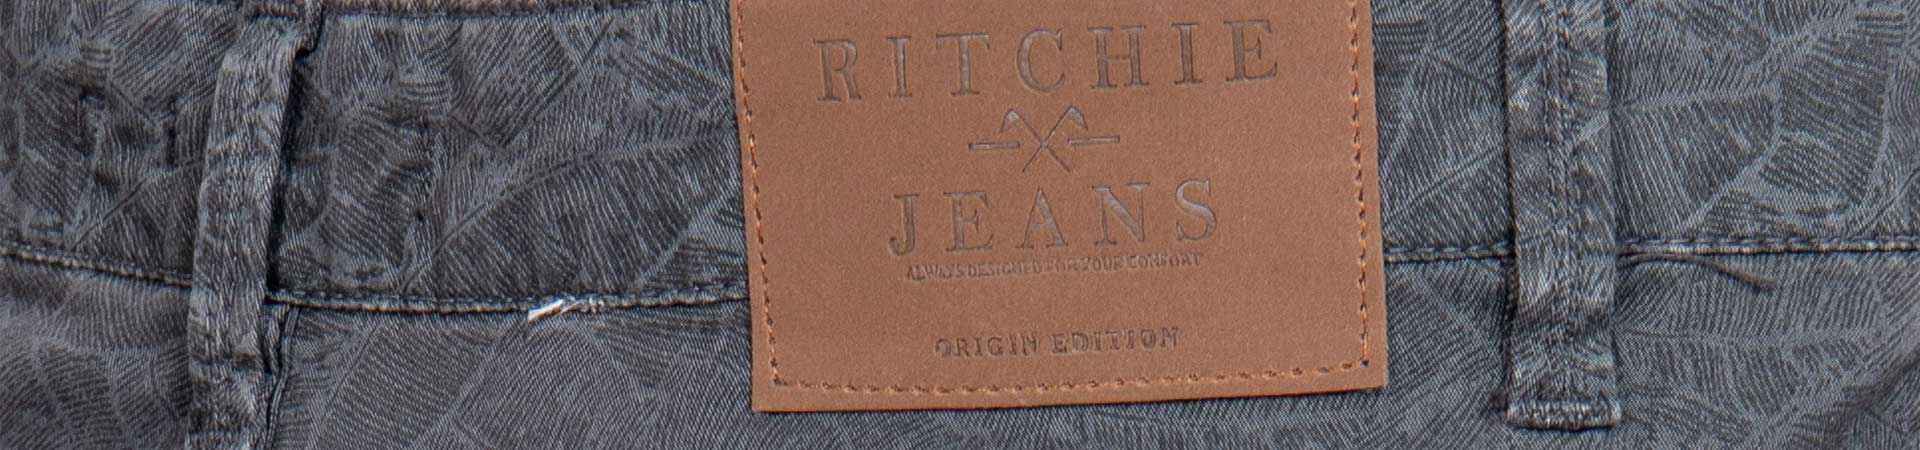 les jeans by ritchie jeans